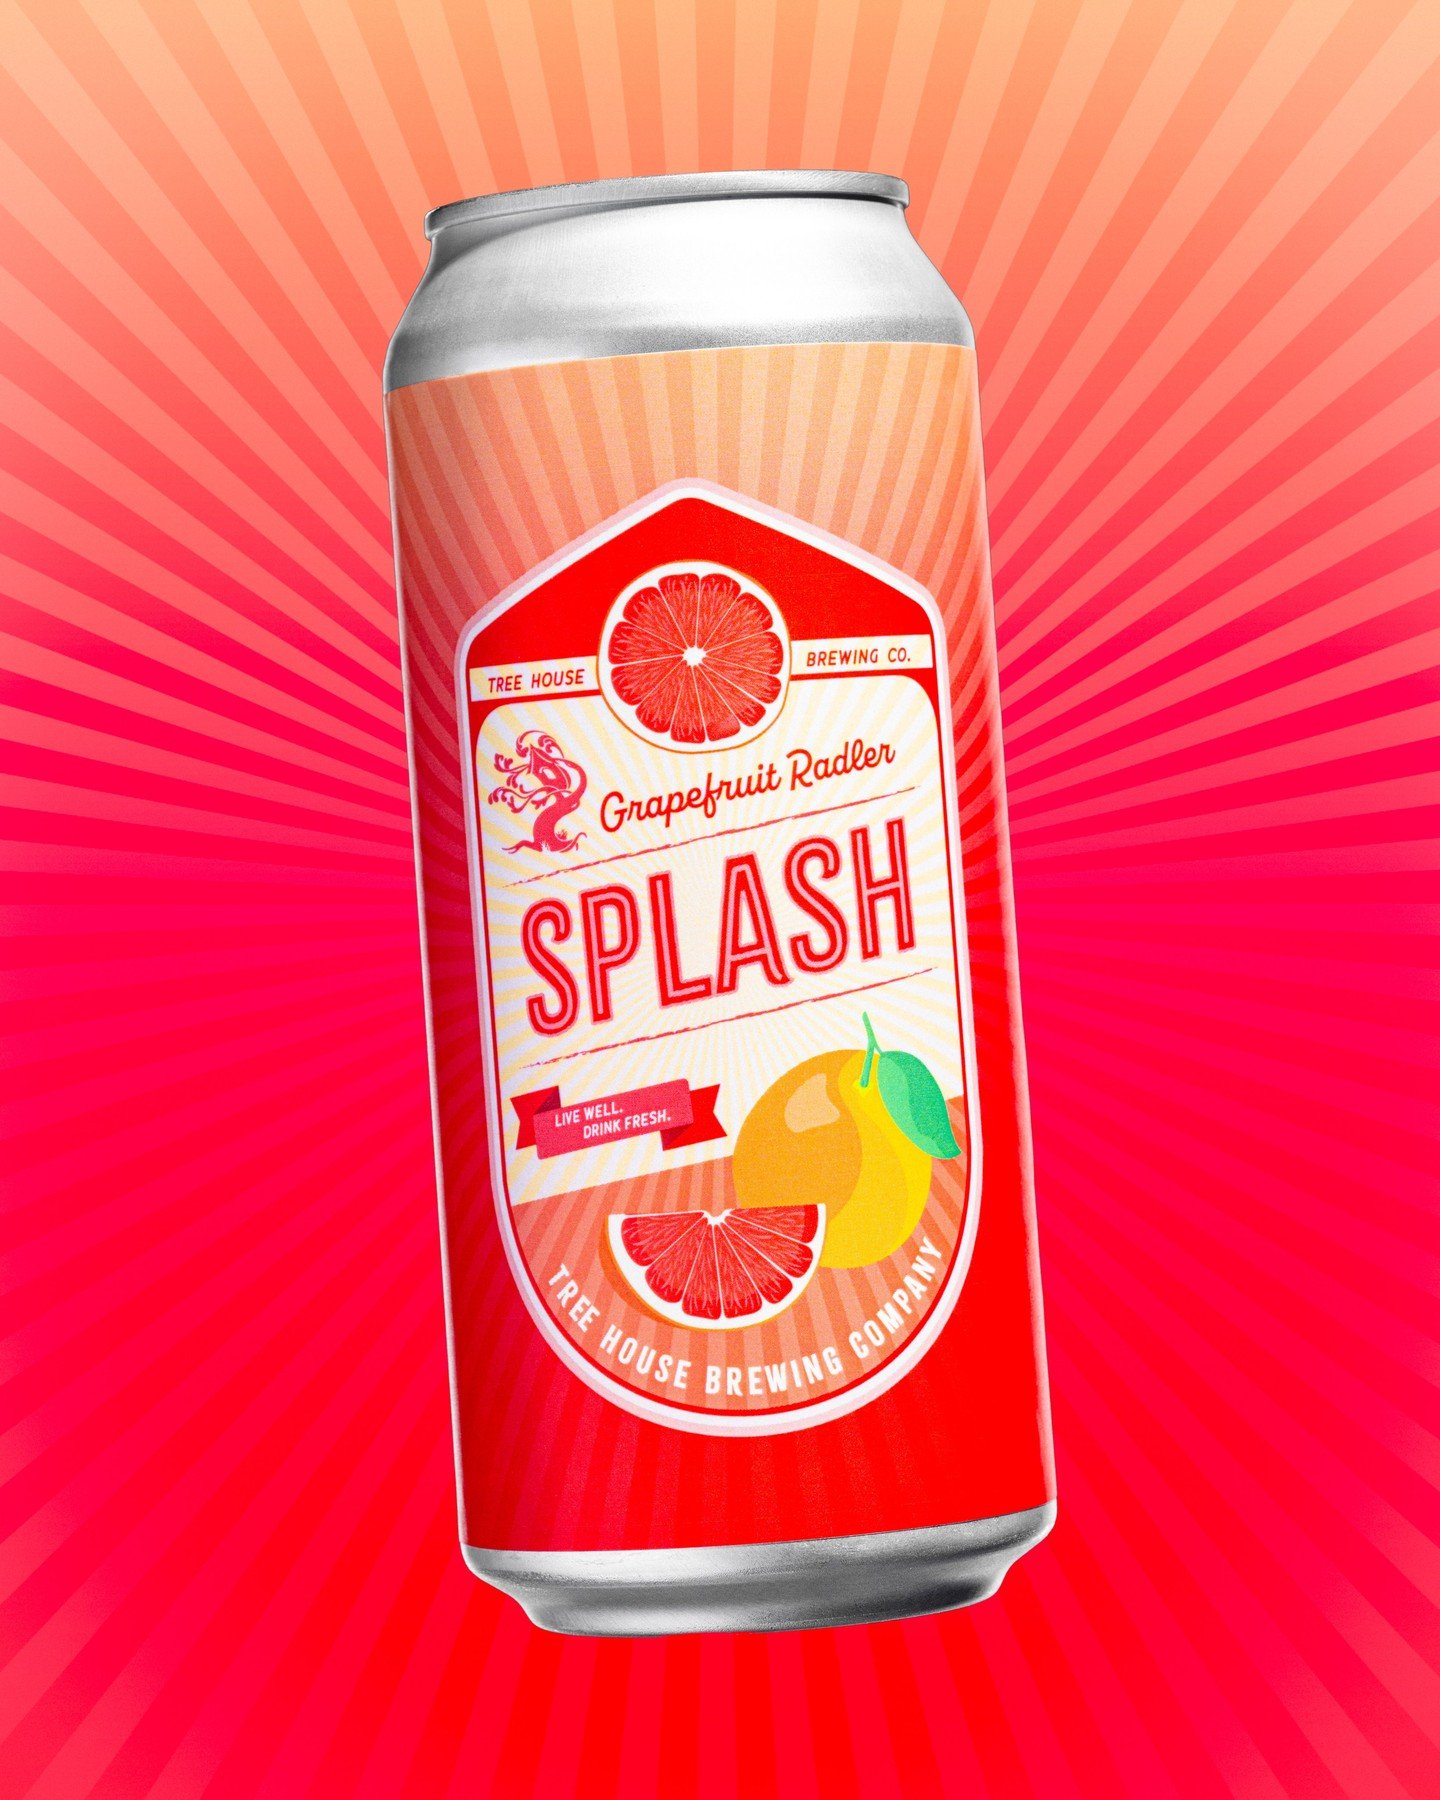 It&rsquo;s no secret that we love a beer that snaps with grapefruit flavor, so how could we say no to the classic blend of Wheat beer and grapefruit juice?!

What was once a niche libation reserved for those craving refreshments after a workout has n